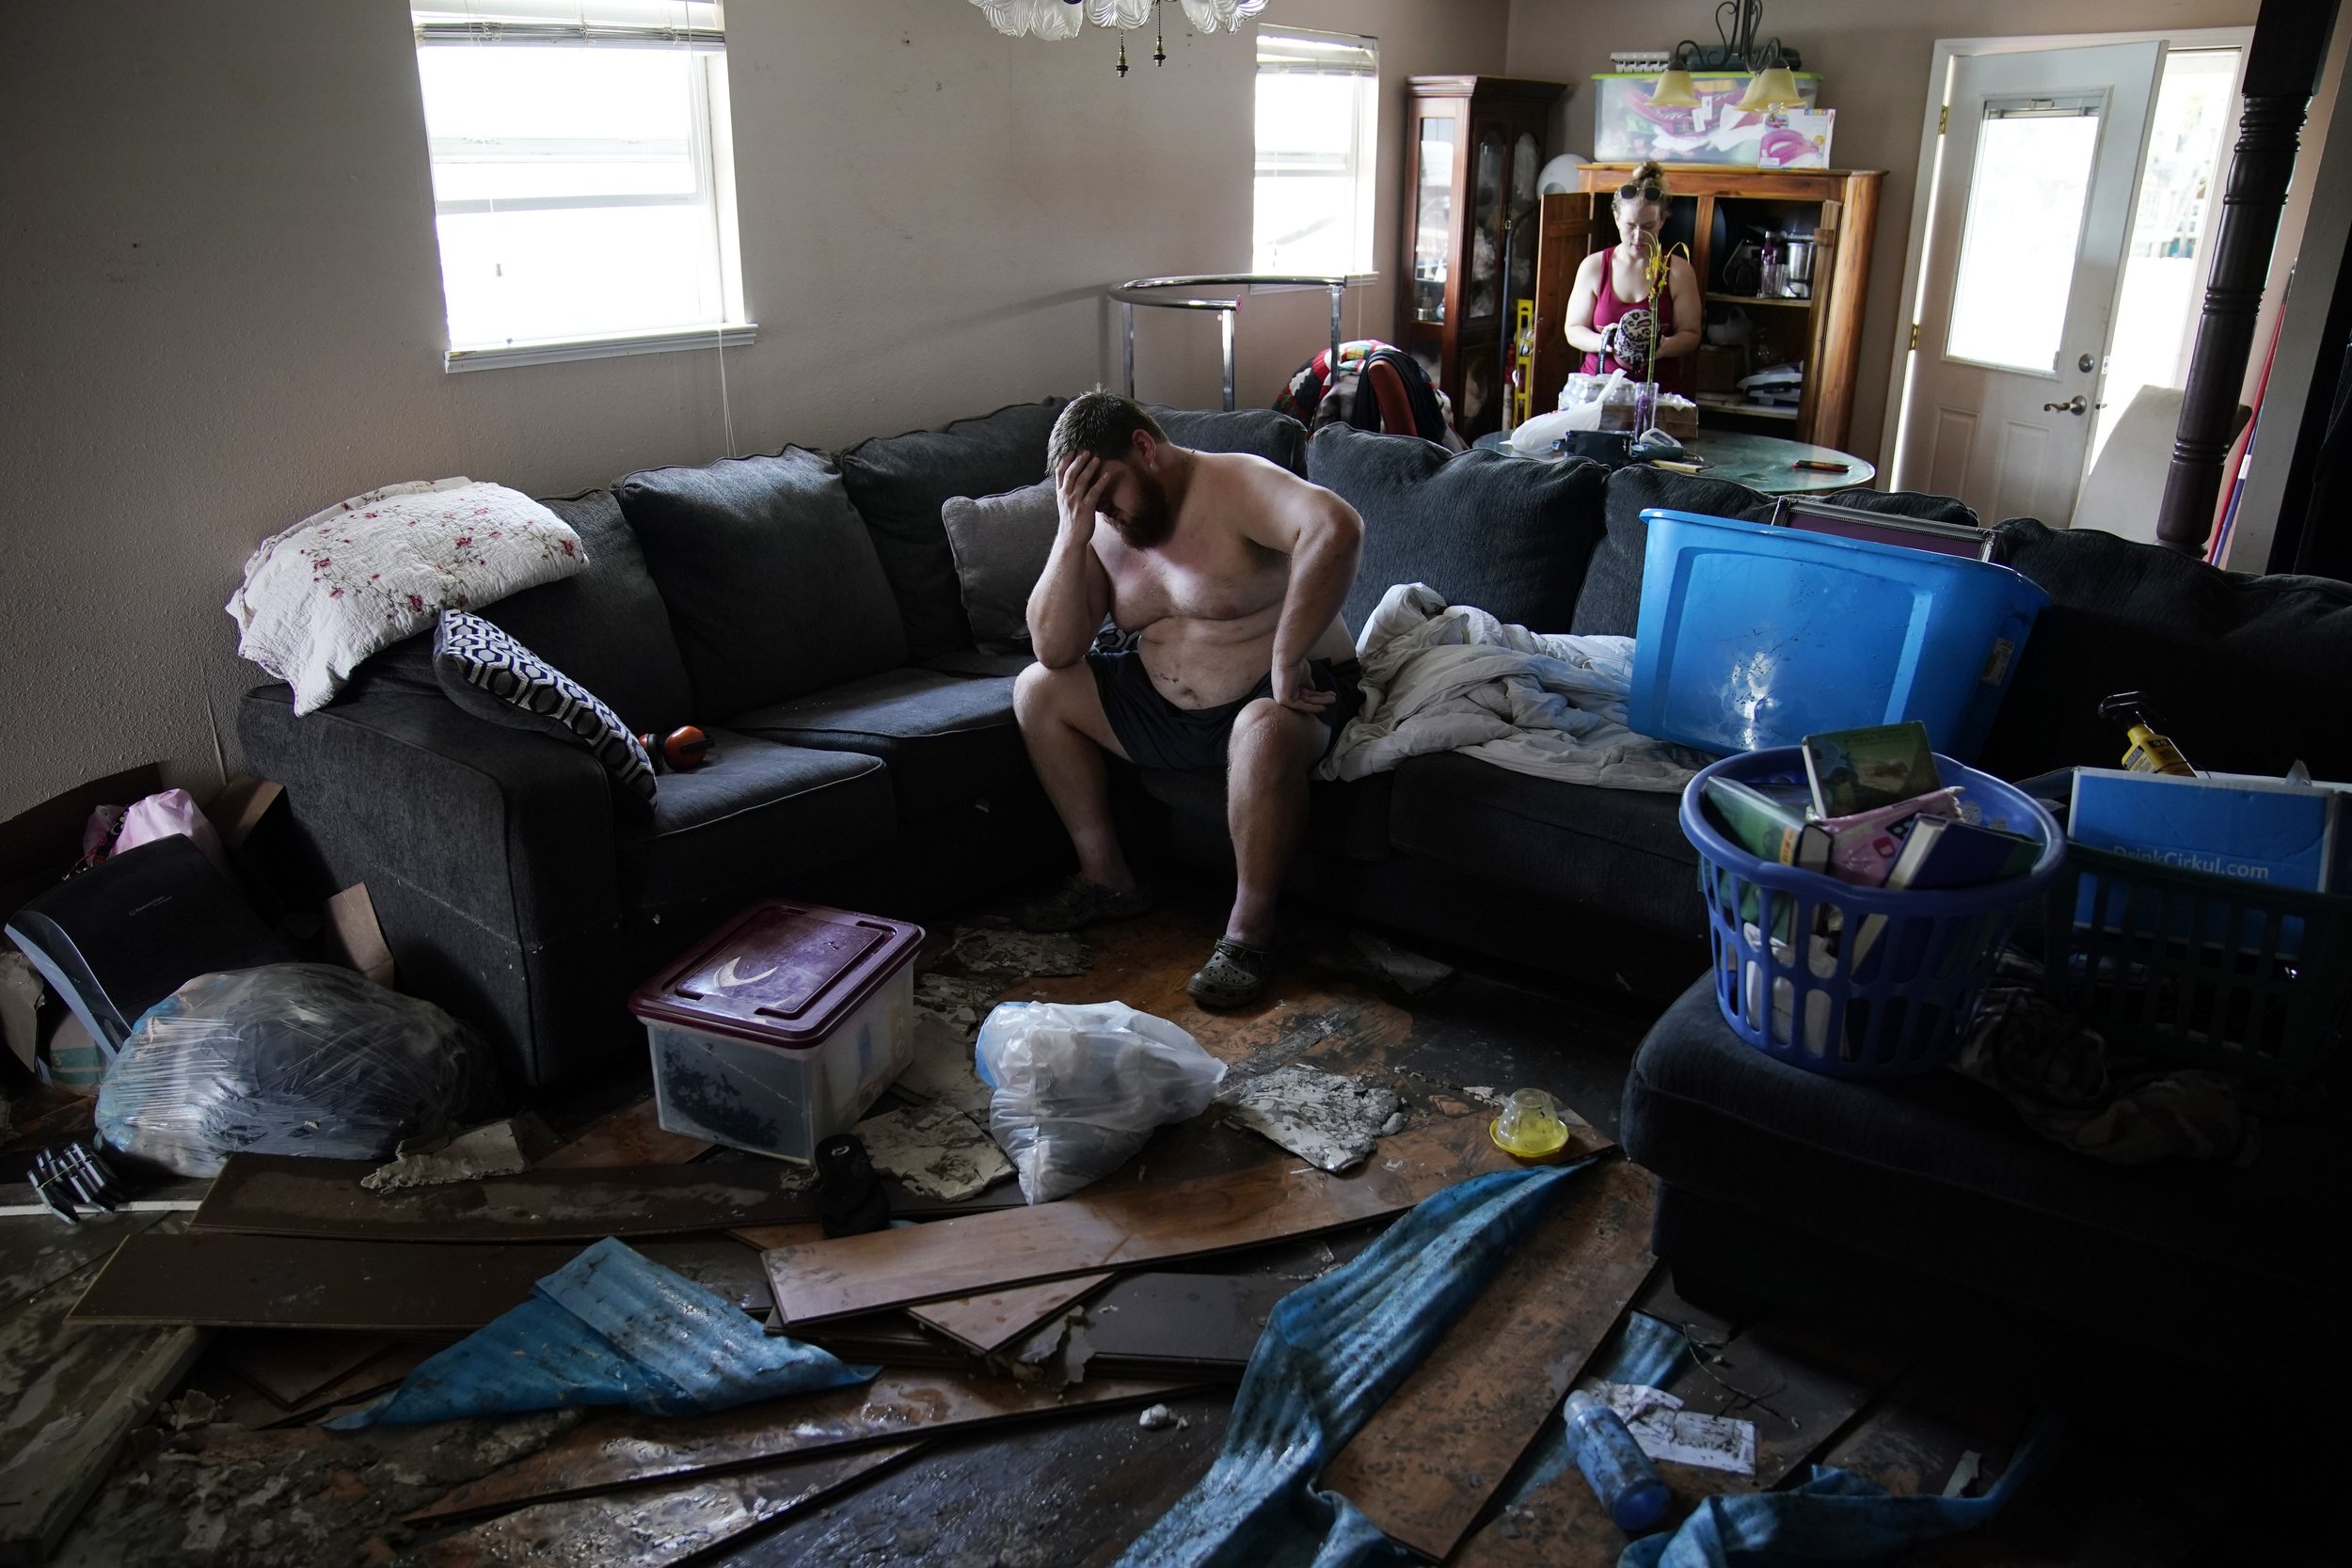  Josh Montford rests his head in his hand while going through his flood damaged home in the aftermath of Hurricane Ida, on Sept. 1, 2021, in Jean Lafitte, La. "I'm overwhelmed," said Montford as he searched for items to salvage. (AP Photo/John Locher